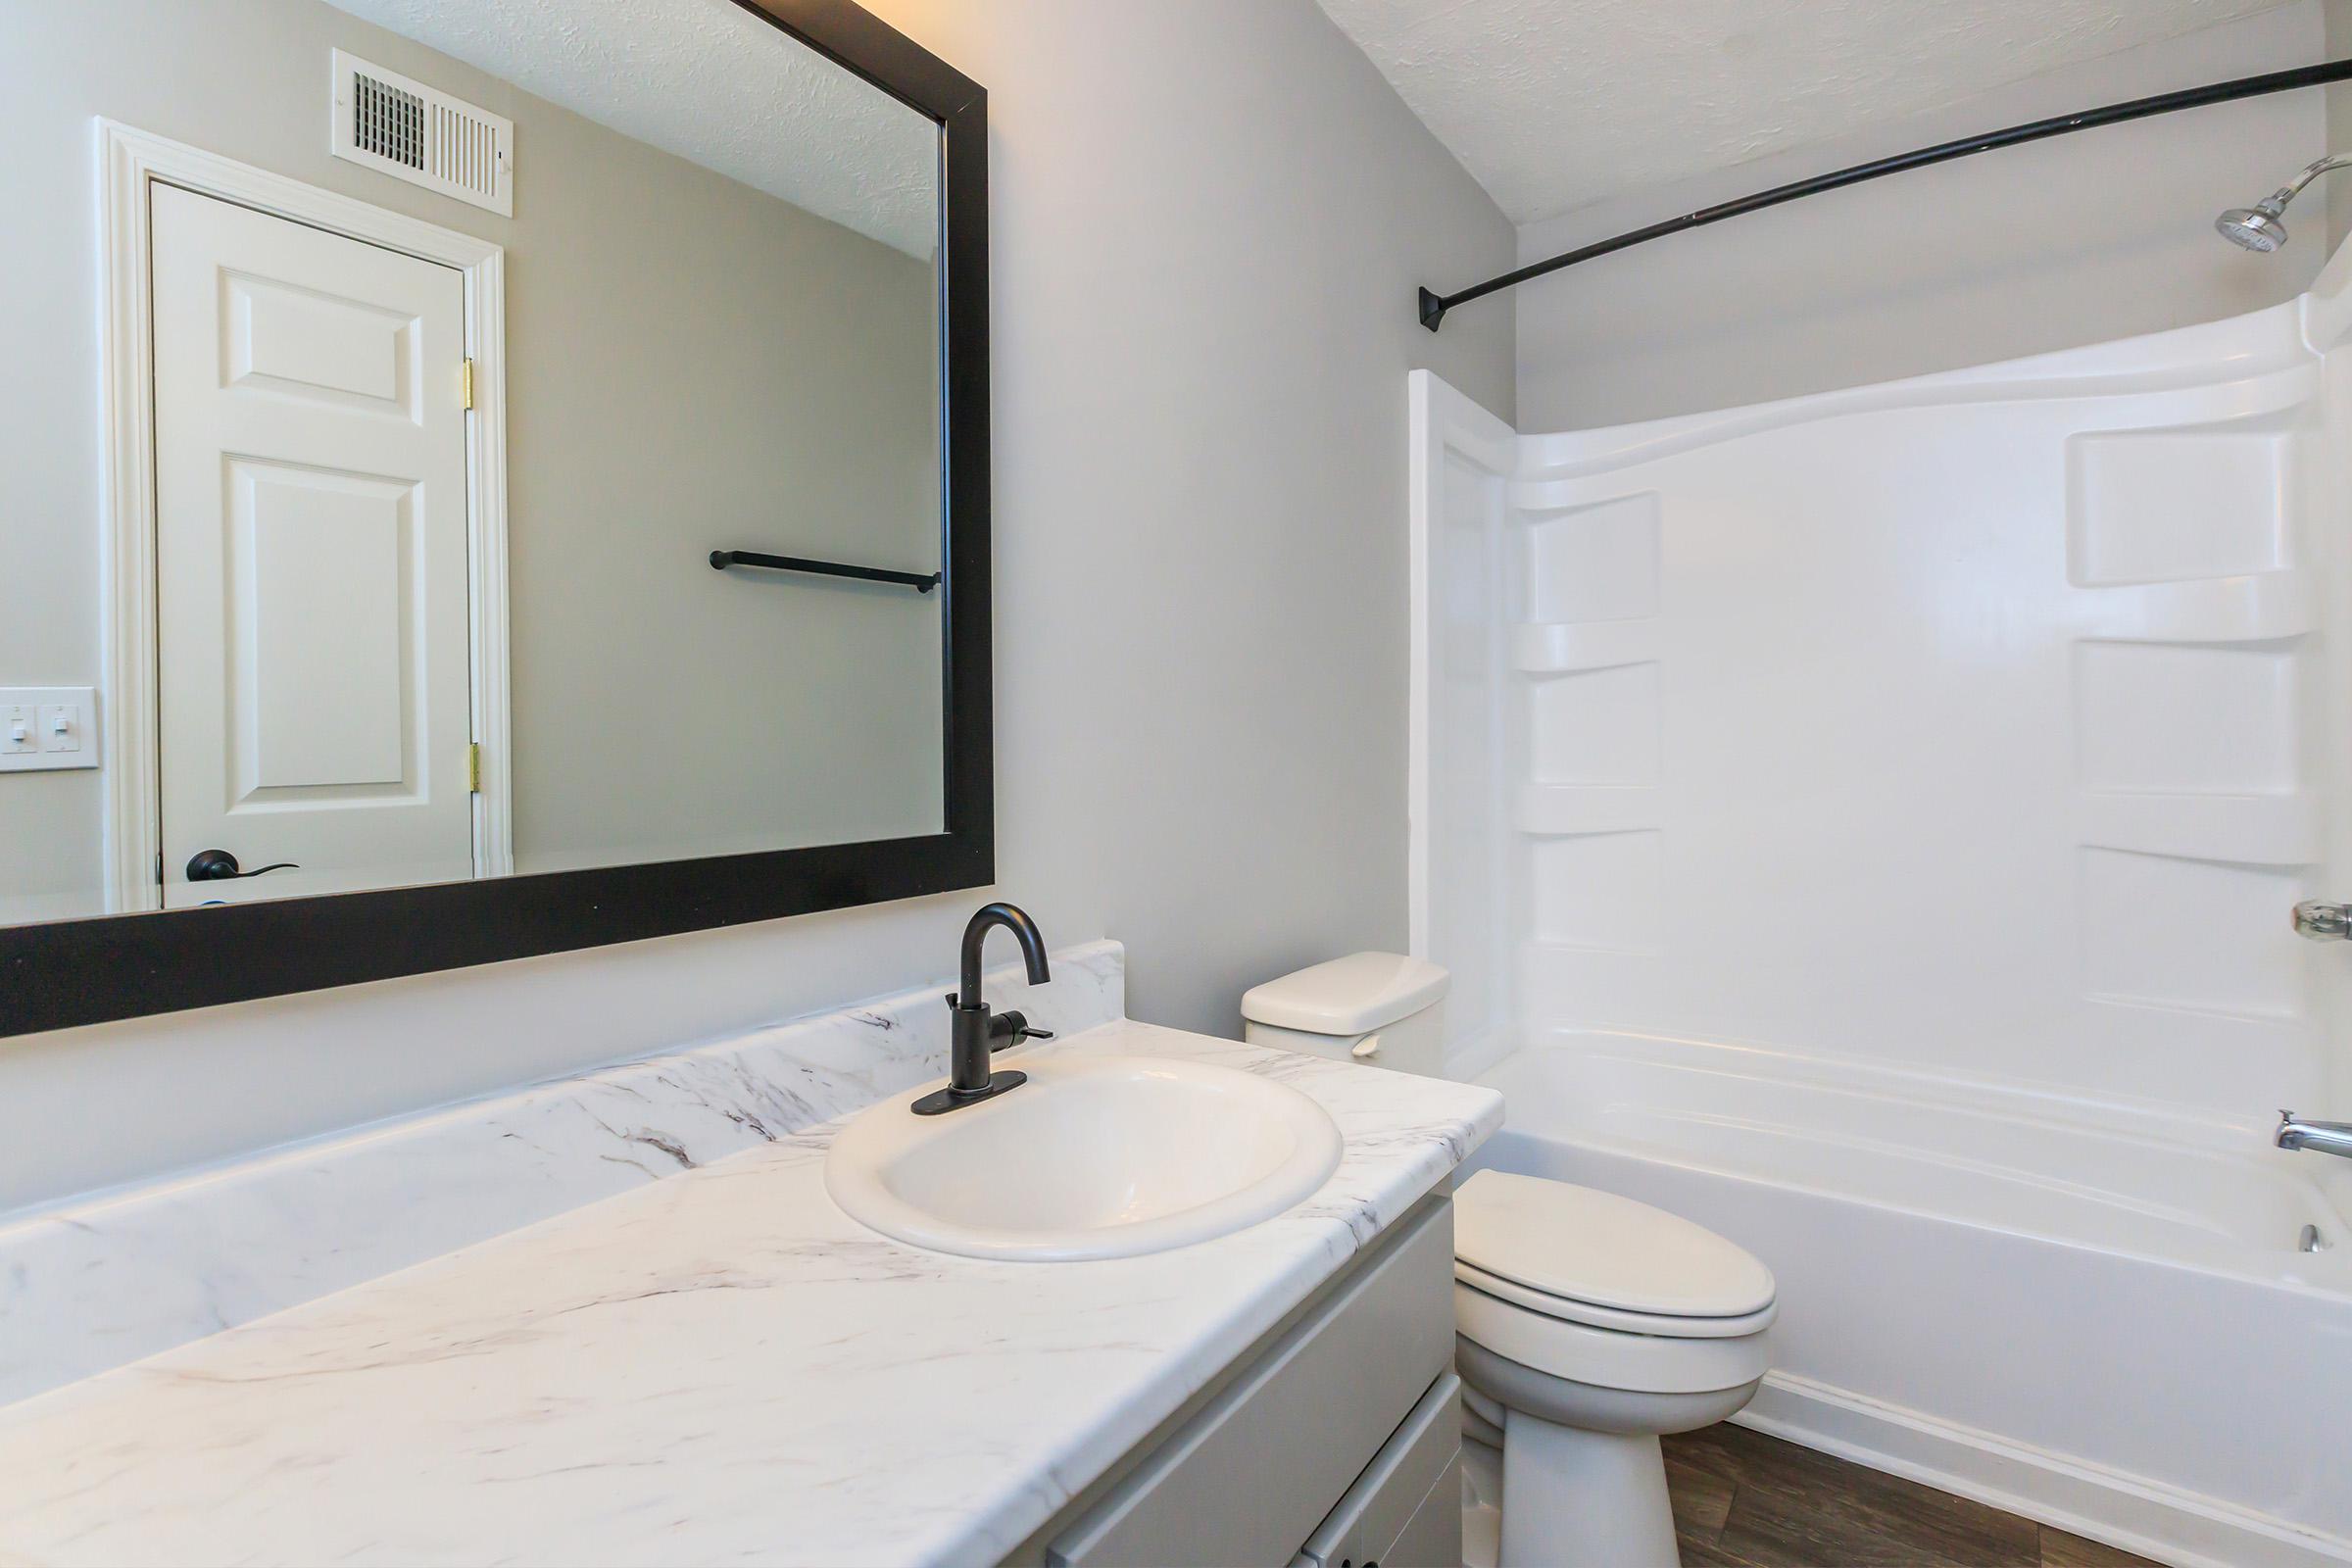 The contemporary and exquisite bathrooms for resident use.